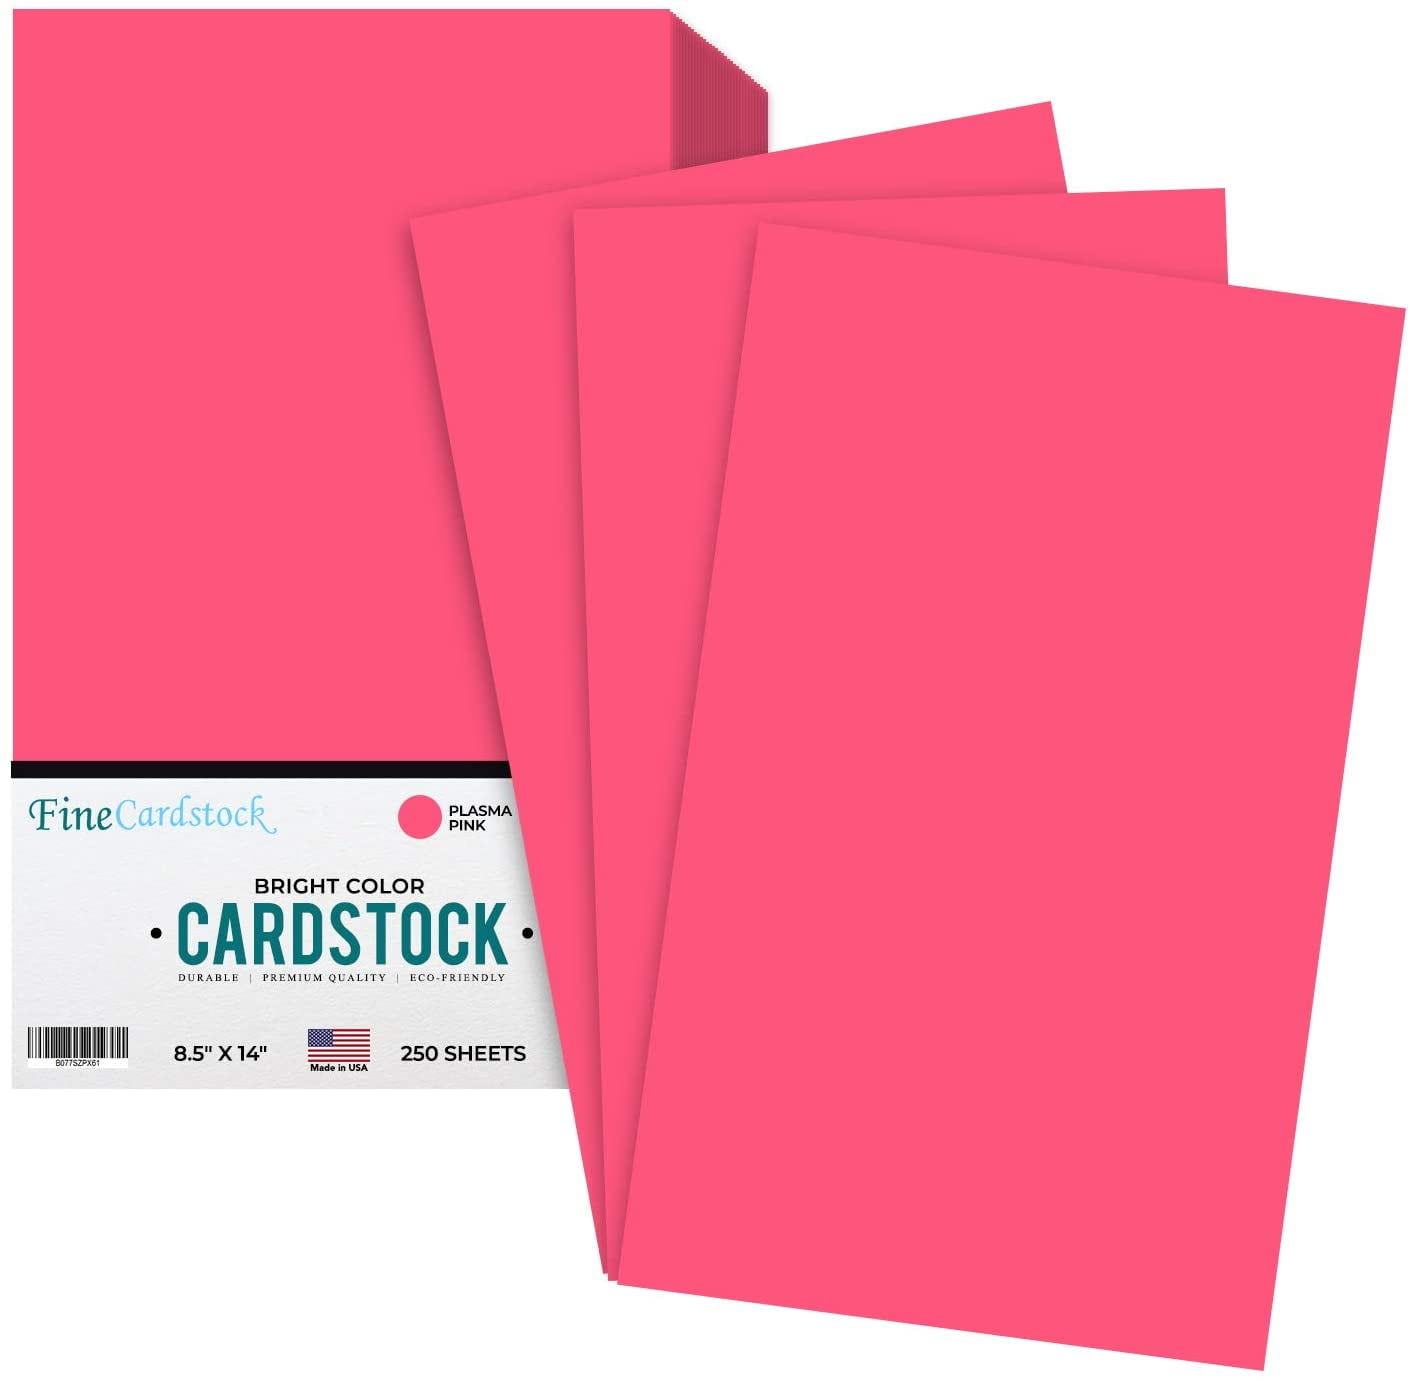 Acid & Lignin Free Premium Color Card Stock Paper Perfect for School Supplies Re-Entry Red Superior Thick 65-lb Cardstock Arts and Crafts 250 Per Pack Holiday Crafting 11 x 17 